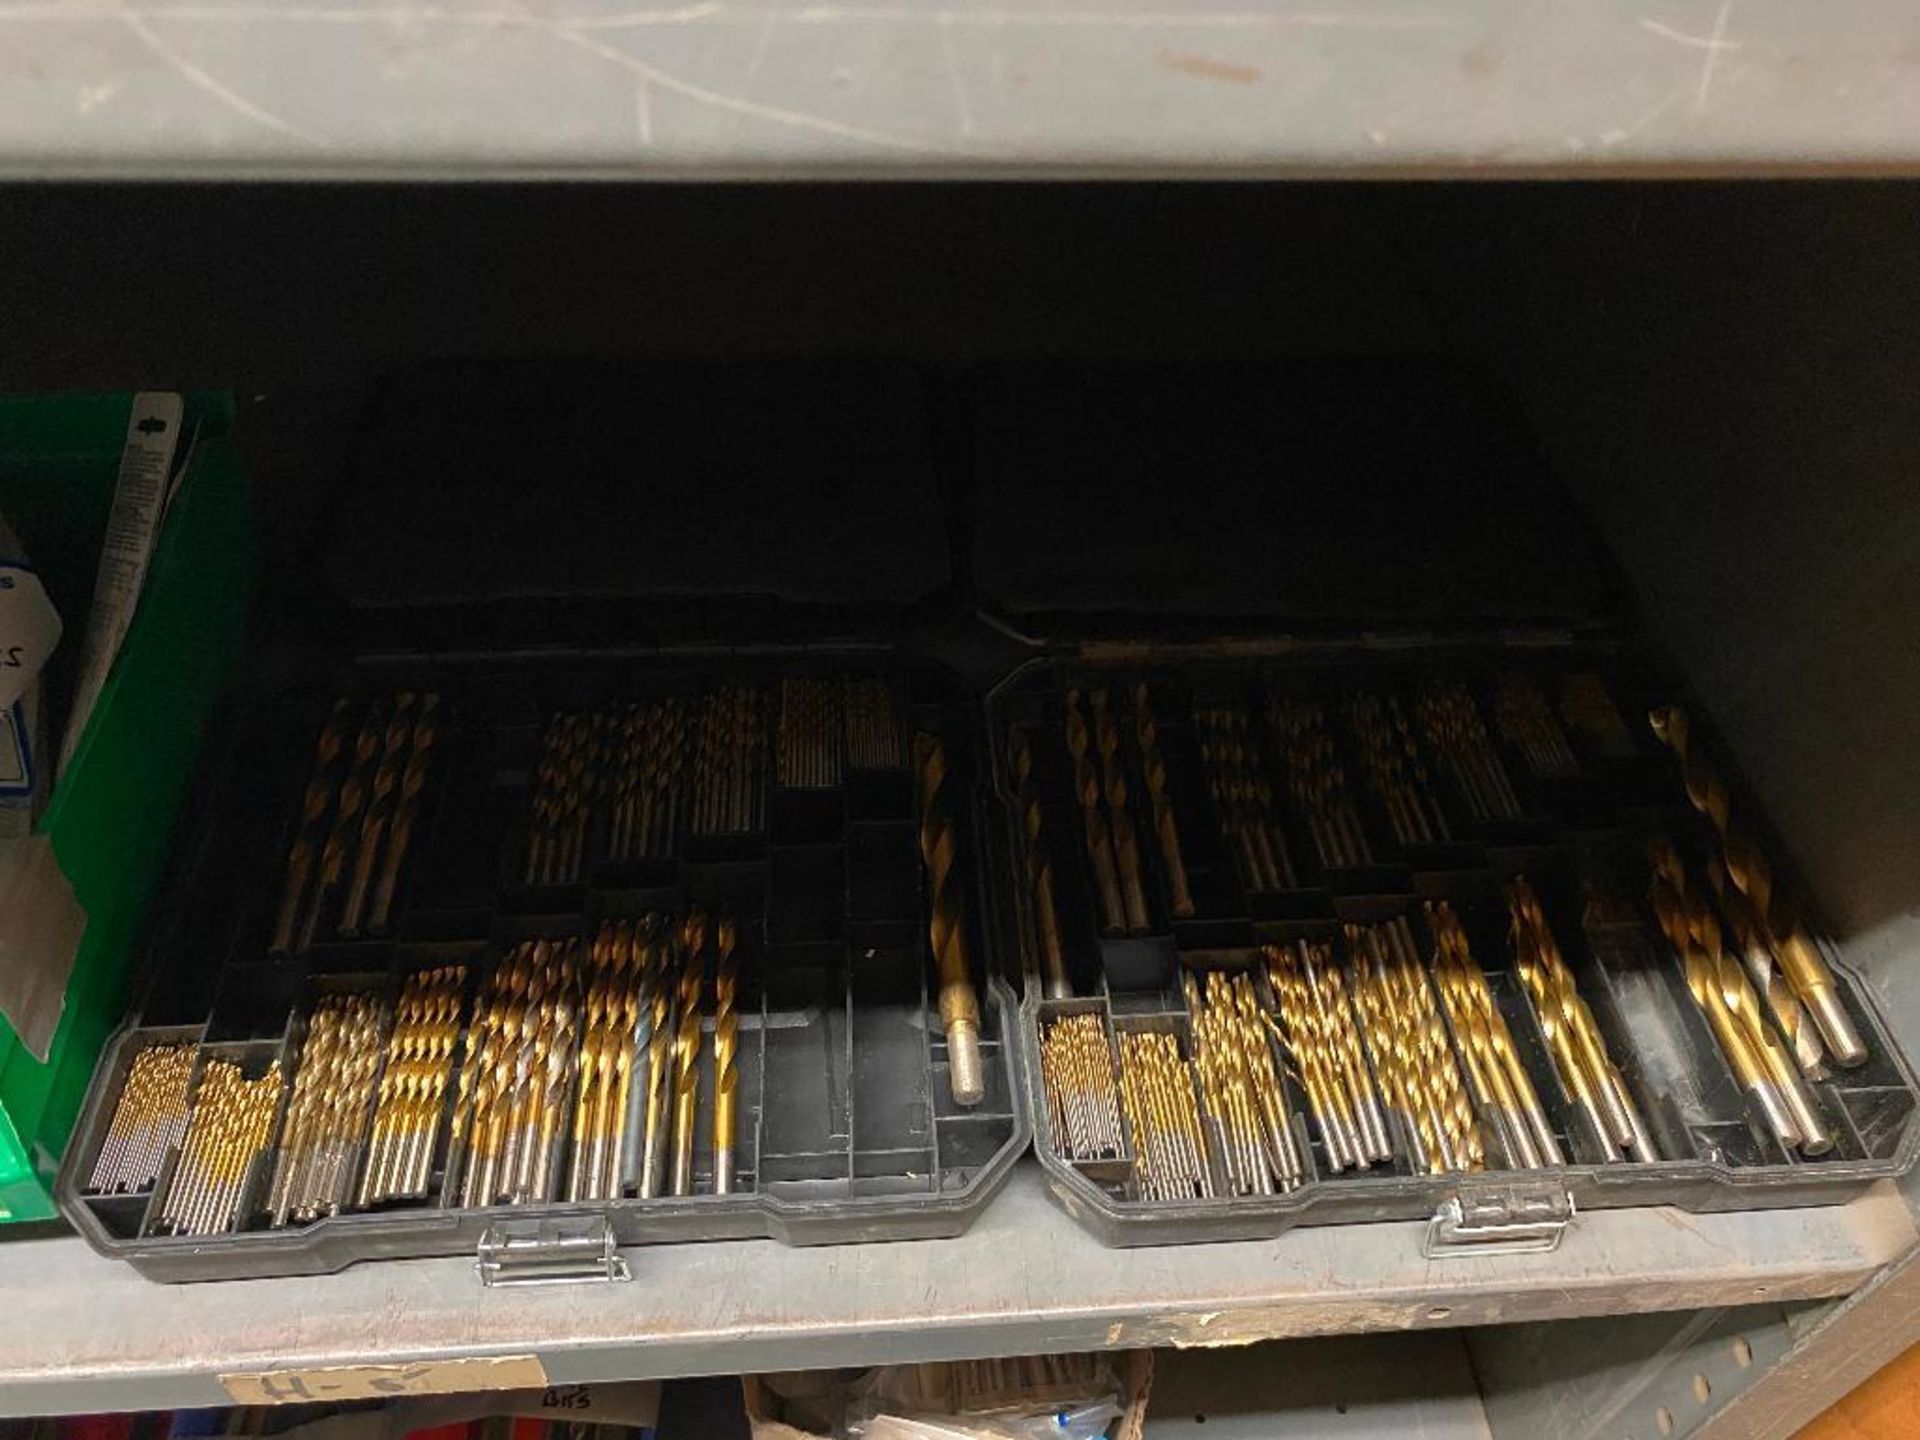 Lot of Asst. Drill Bits, etc. - Image 3 of 4